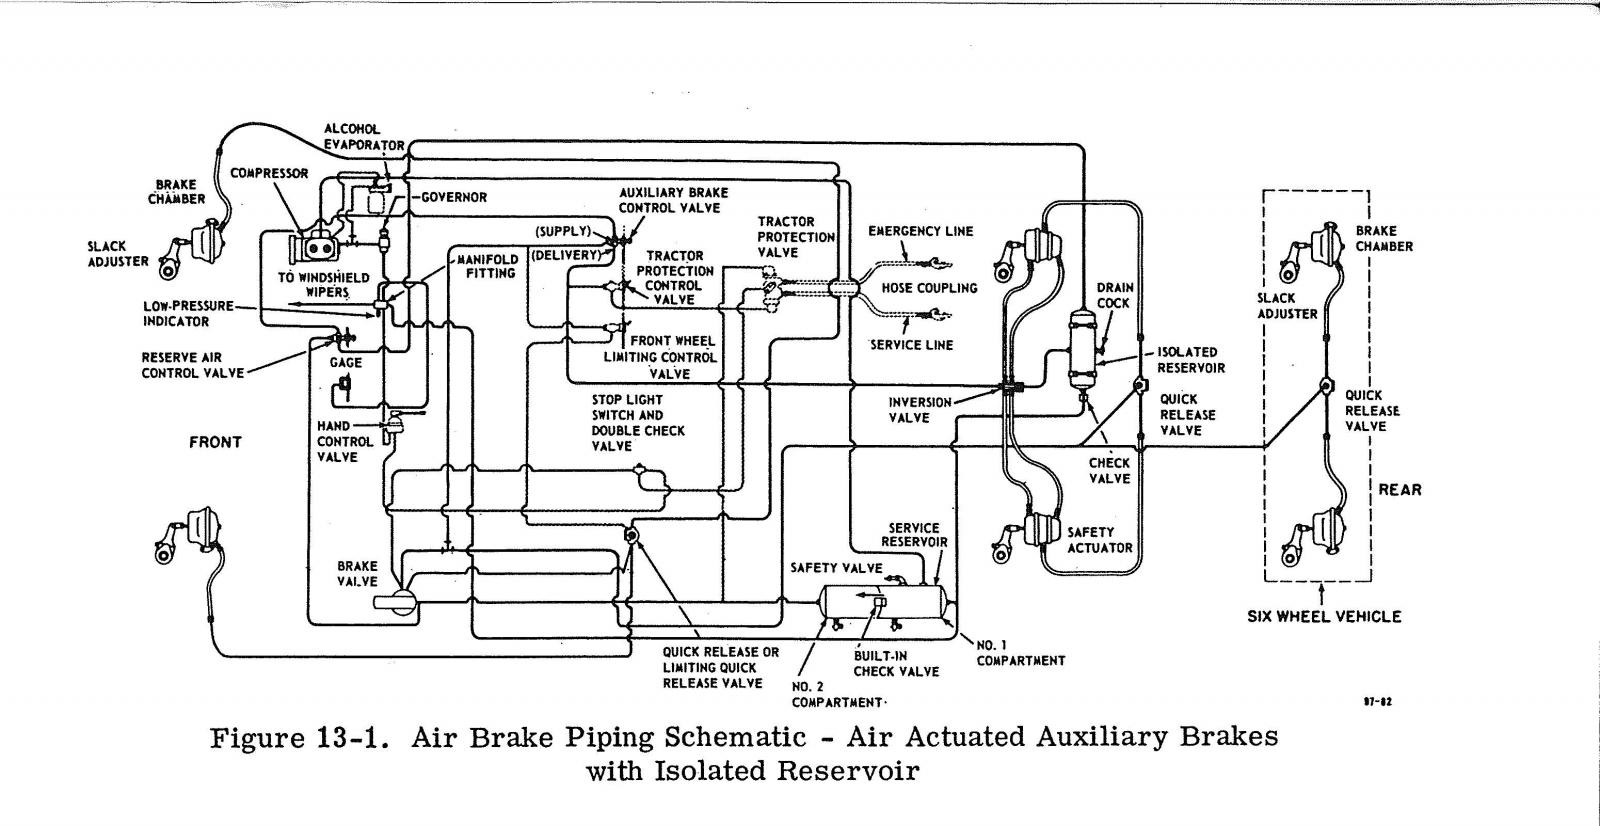 Air plumbing diagram for a B75? - Air Systems and Brakes